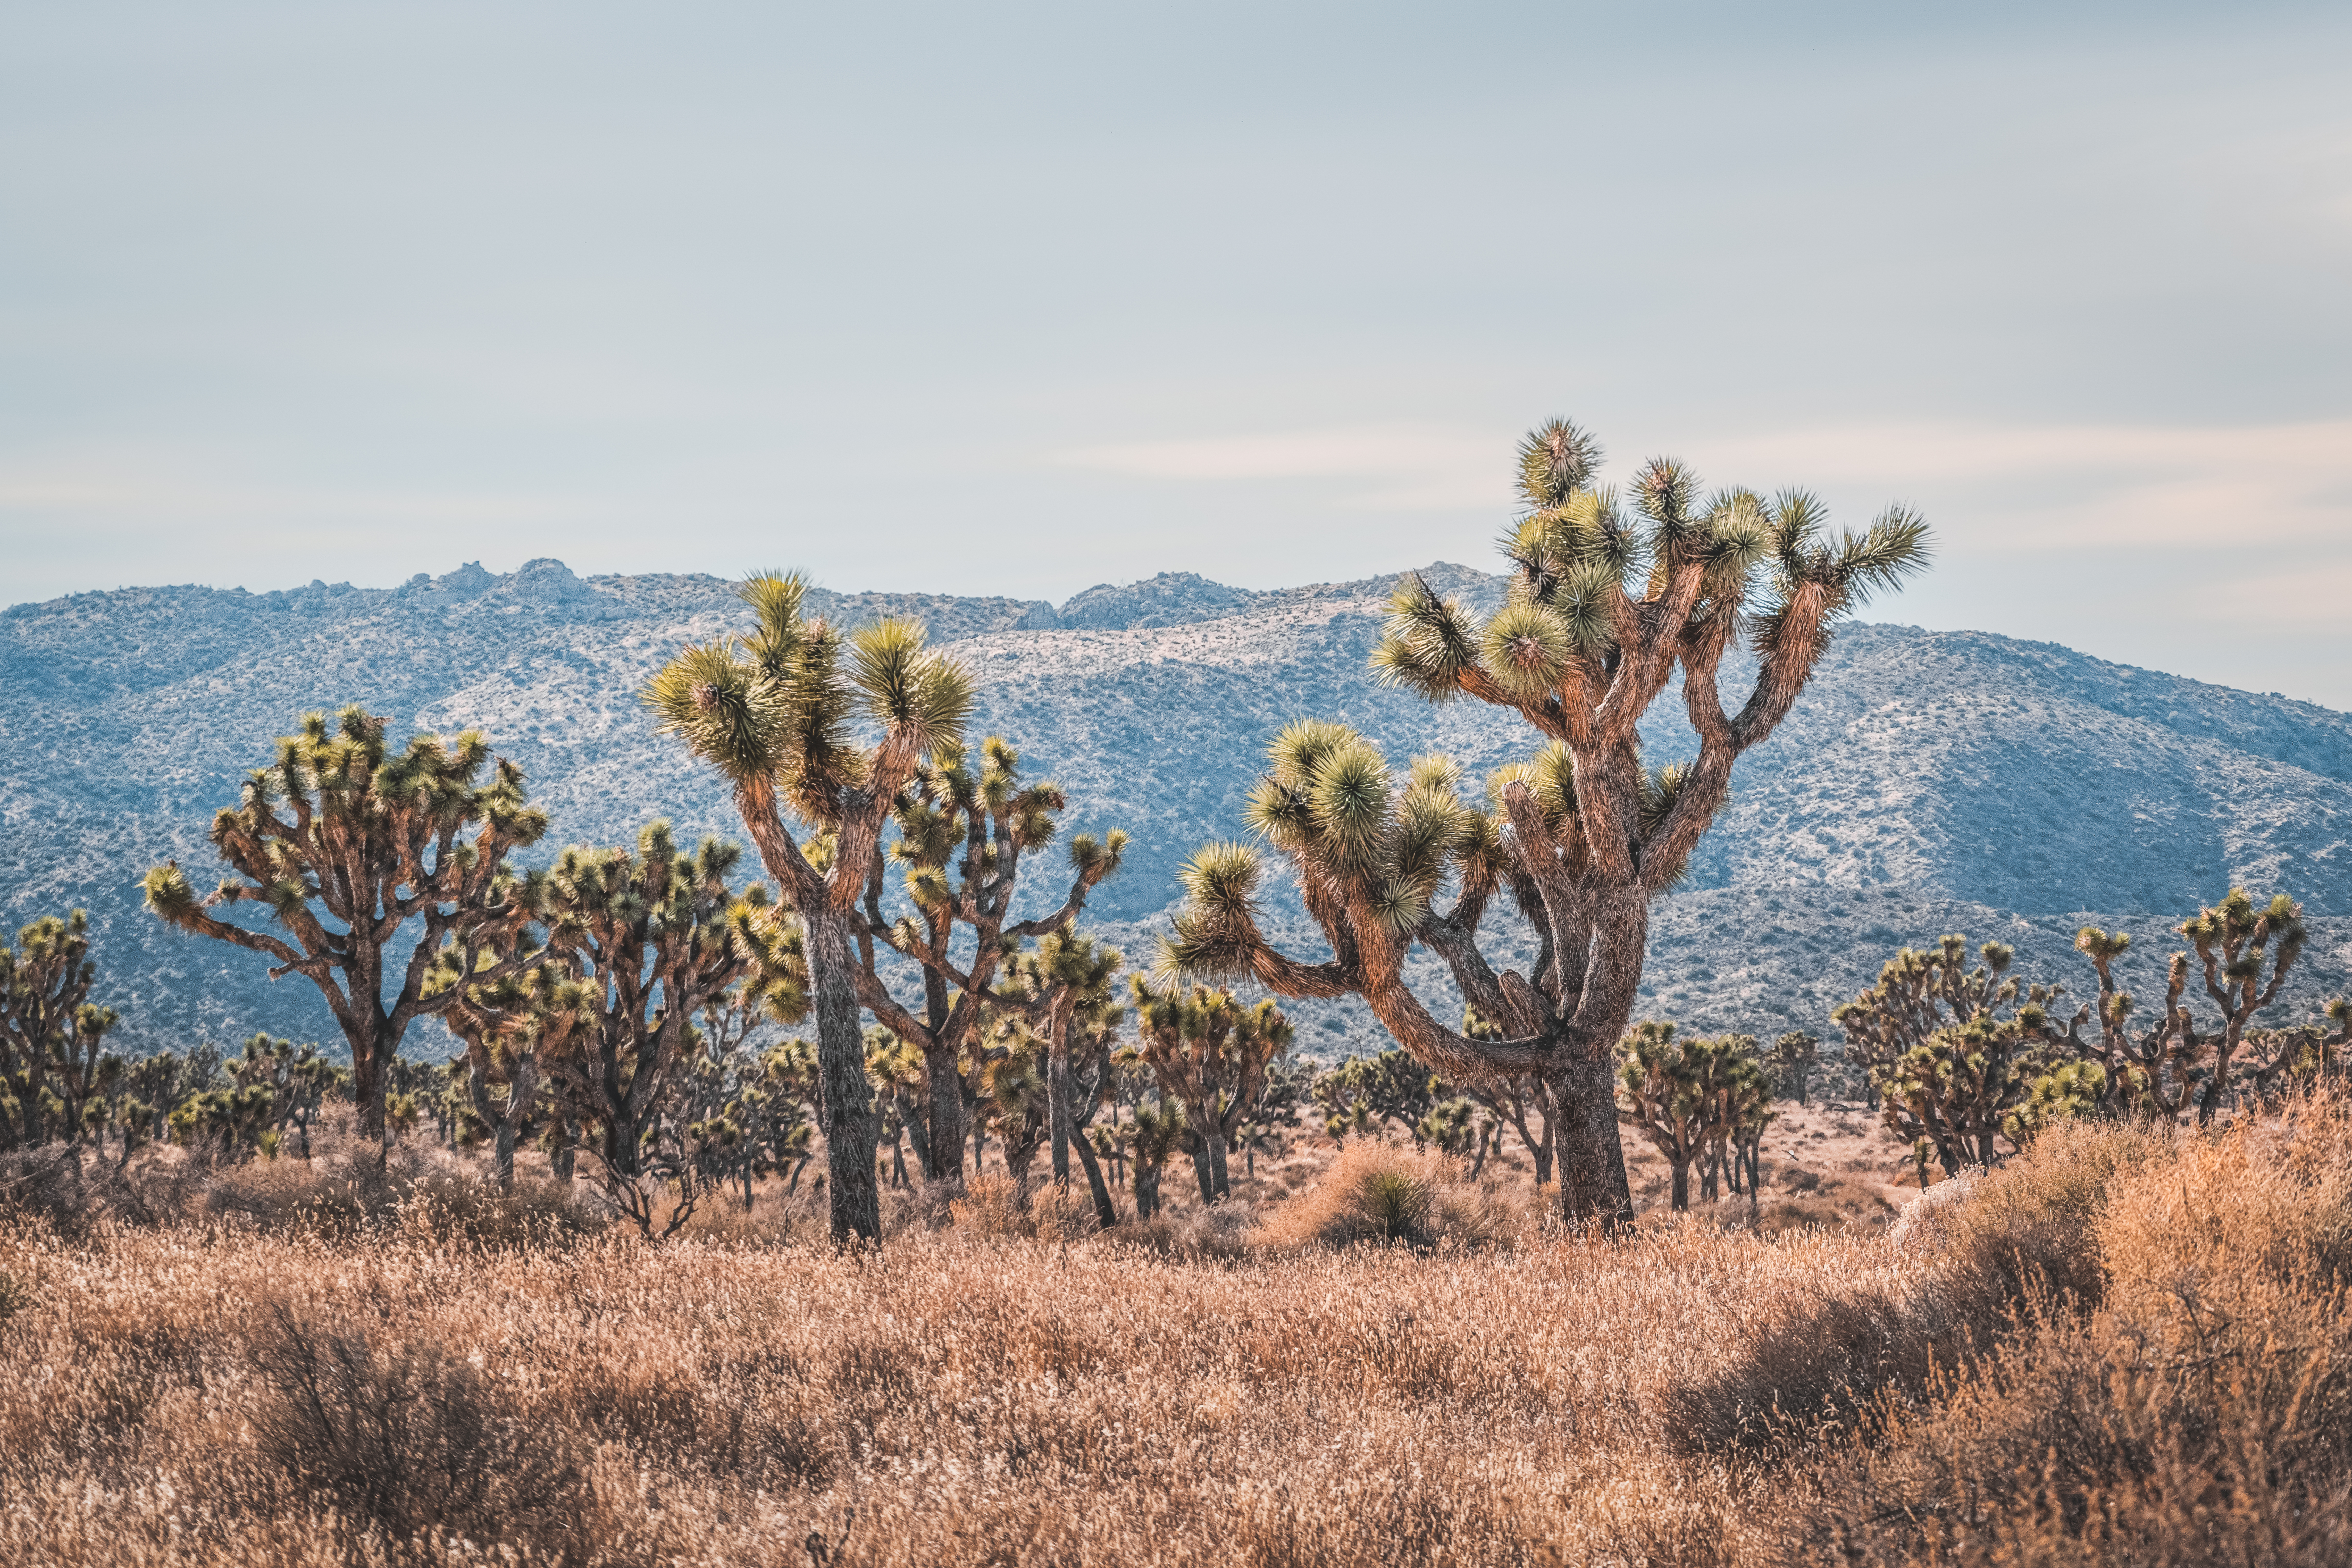 Scale of Wonder: Joshua Trees and Grand Rock Formation